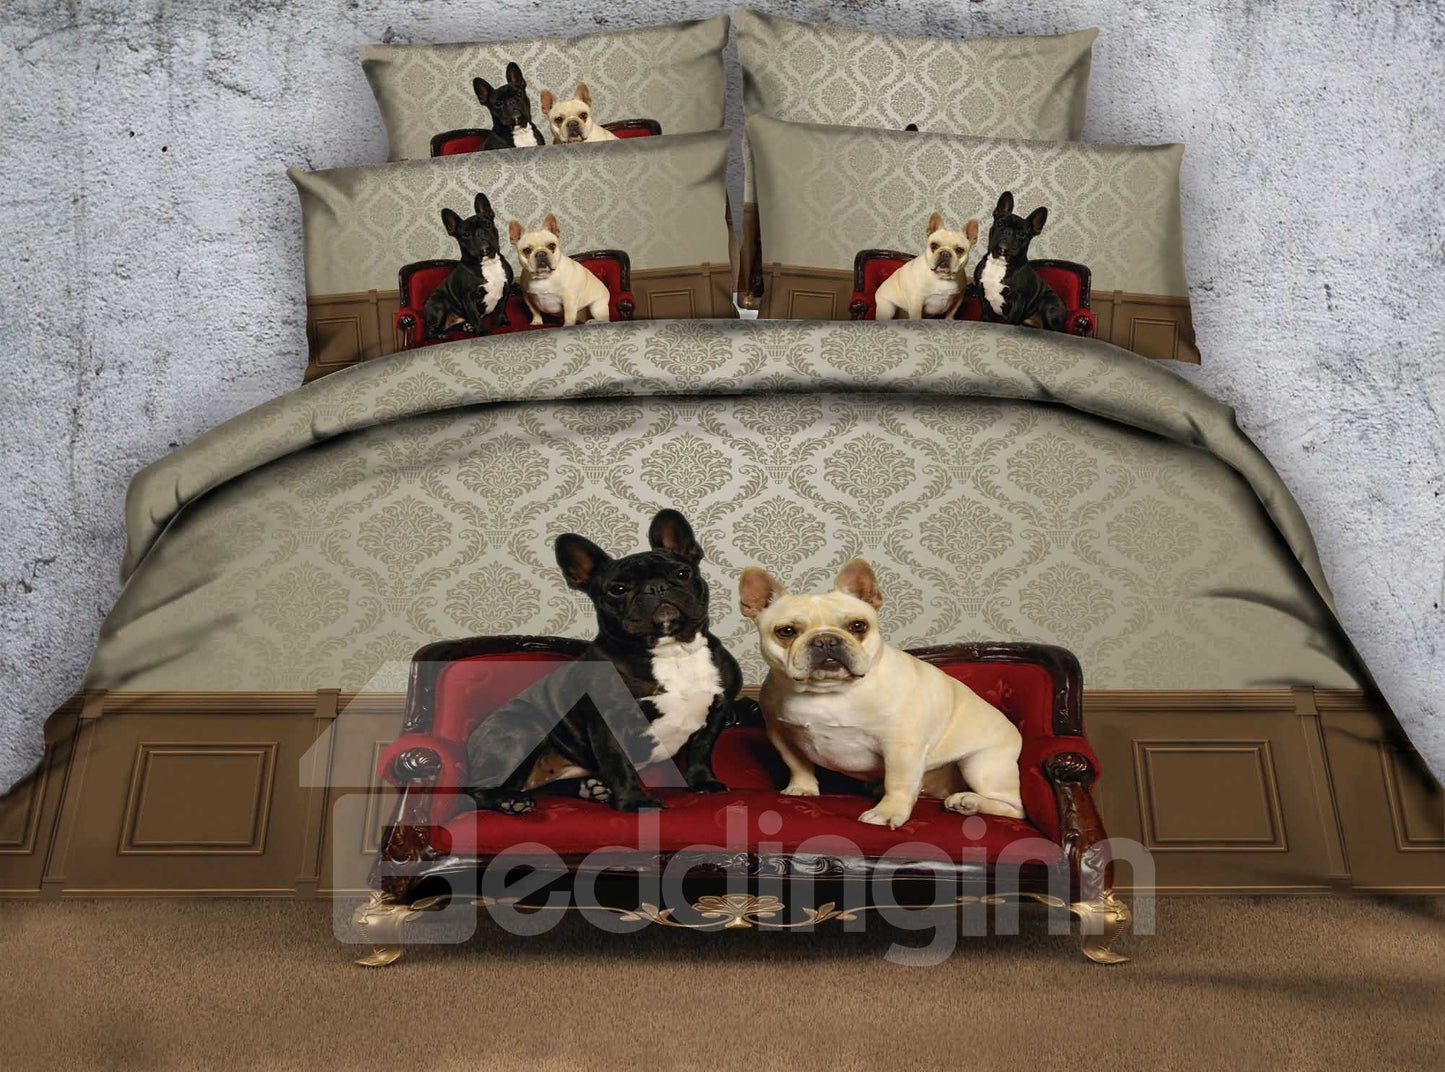 3D Bulldogs Sitting on a Sofa Printed 4-Piece Bedding Sets/Duvet Covers